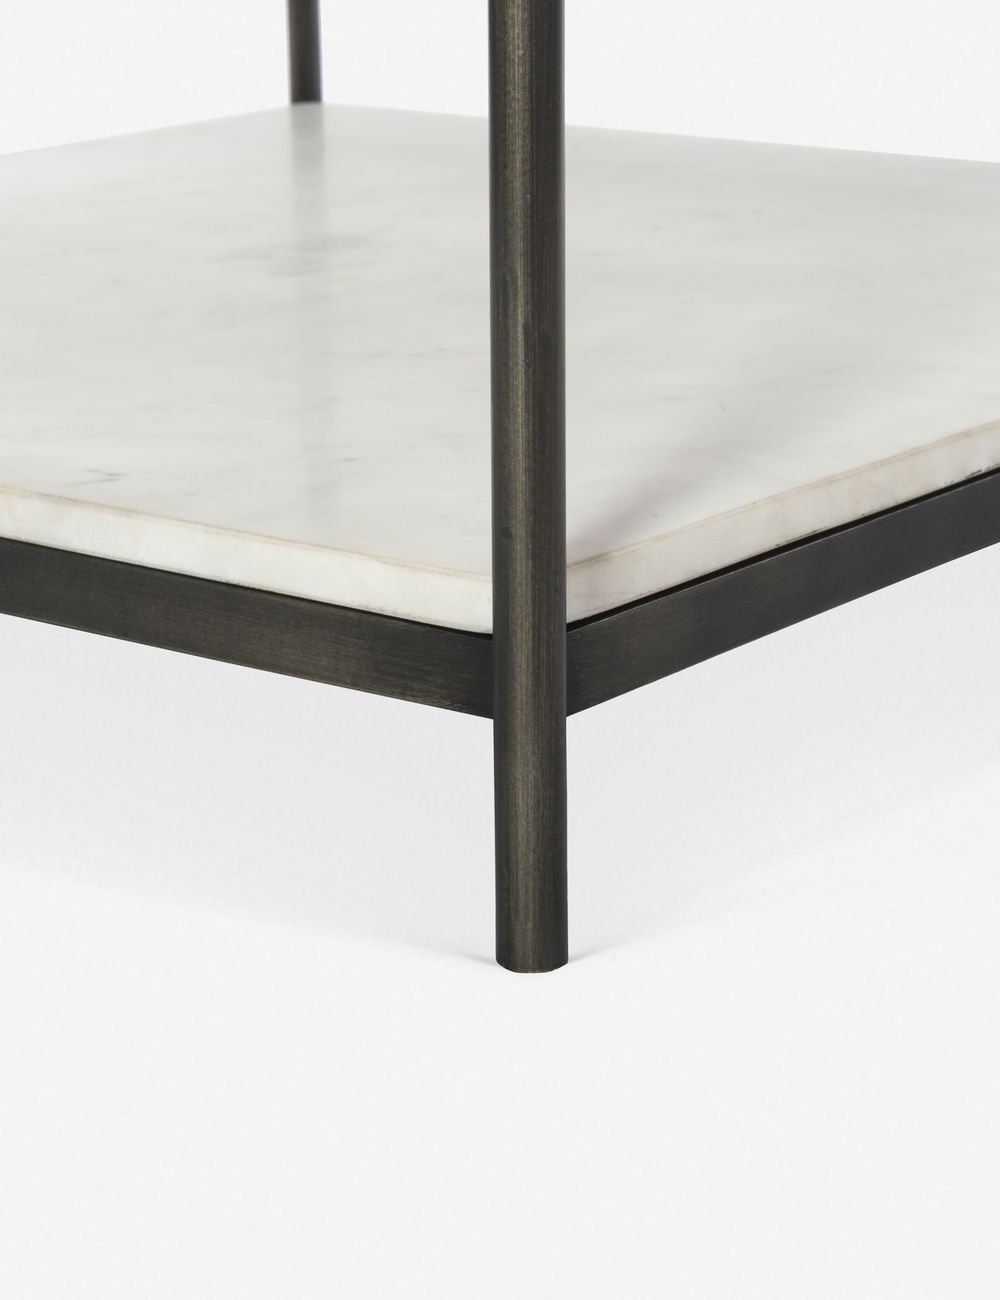 AMORICA BUNCHING TABLE, HAMMERED GREY - Image 3